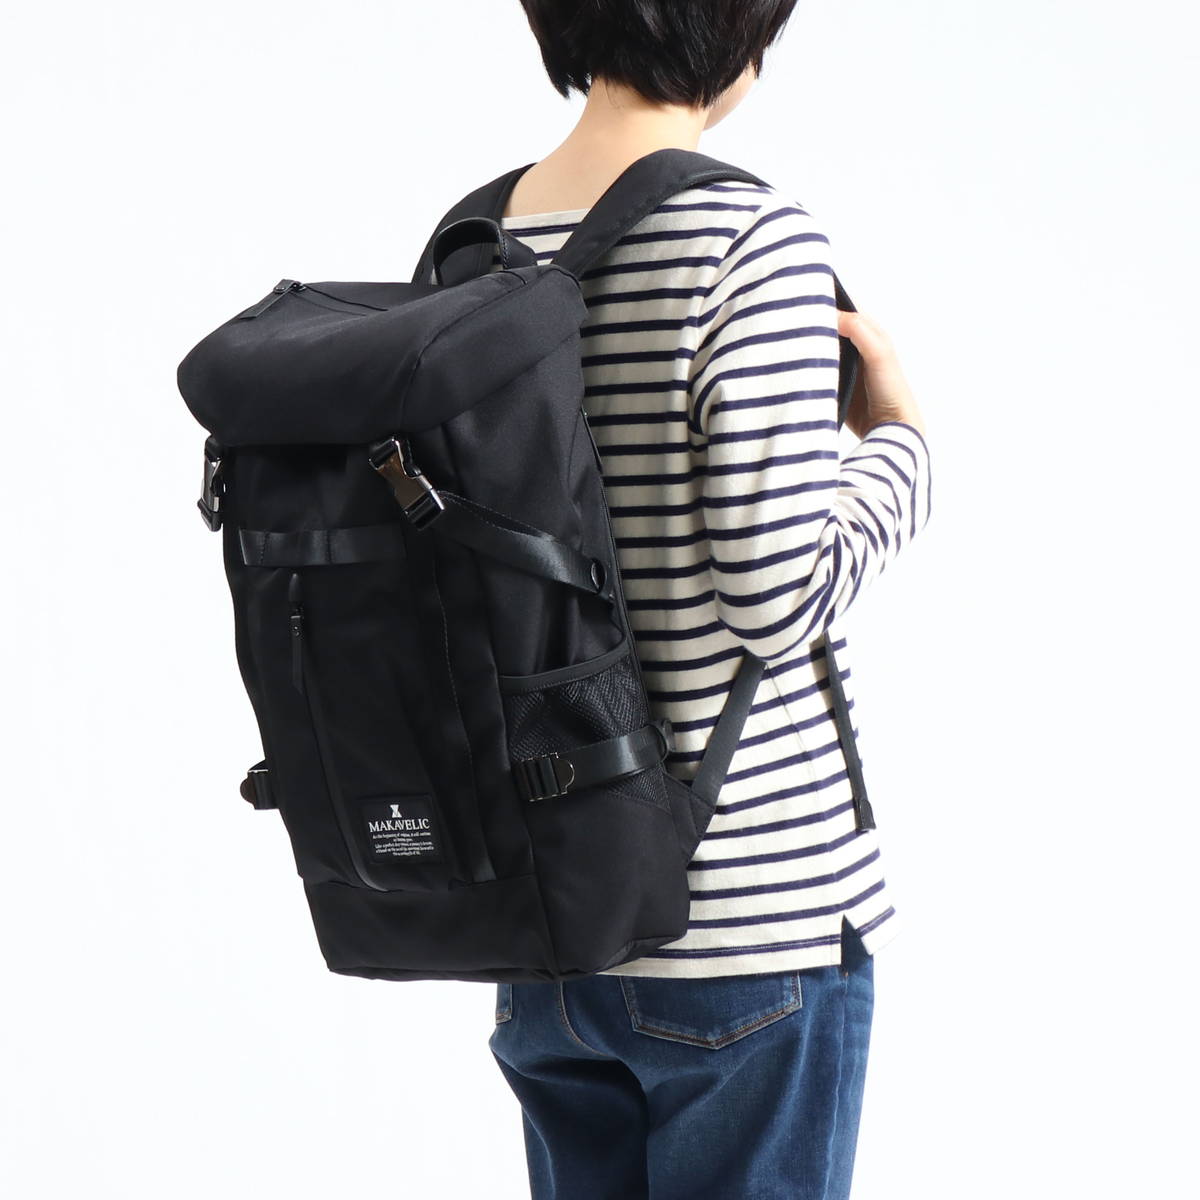 【MAKAVELIC】CHASE DOUBLE LINE BACKPACK